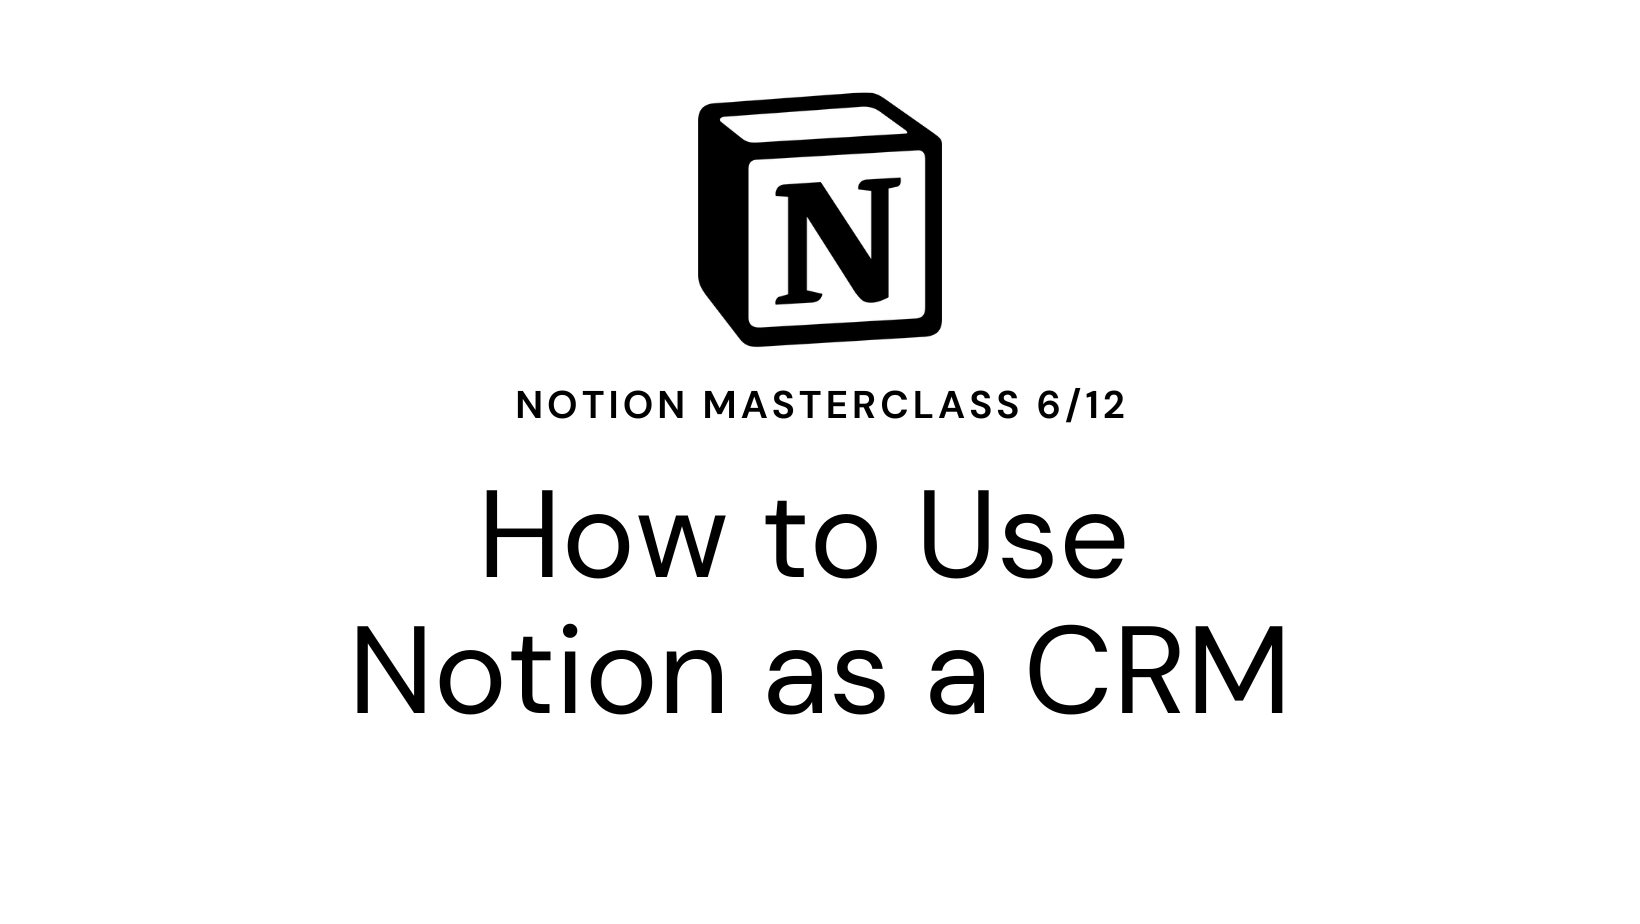 Notion Masterclass 6/12 How to Use Notion as a CRM